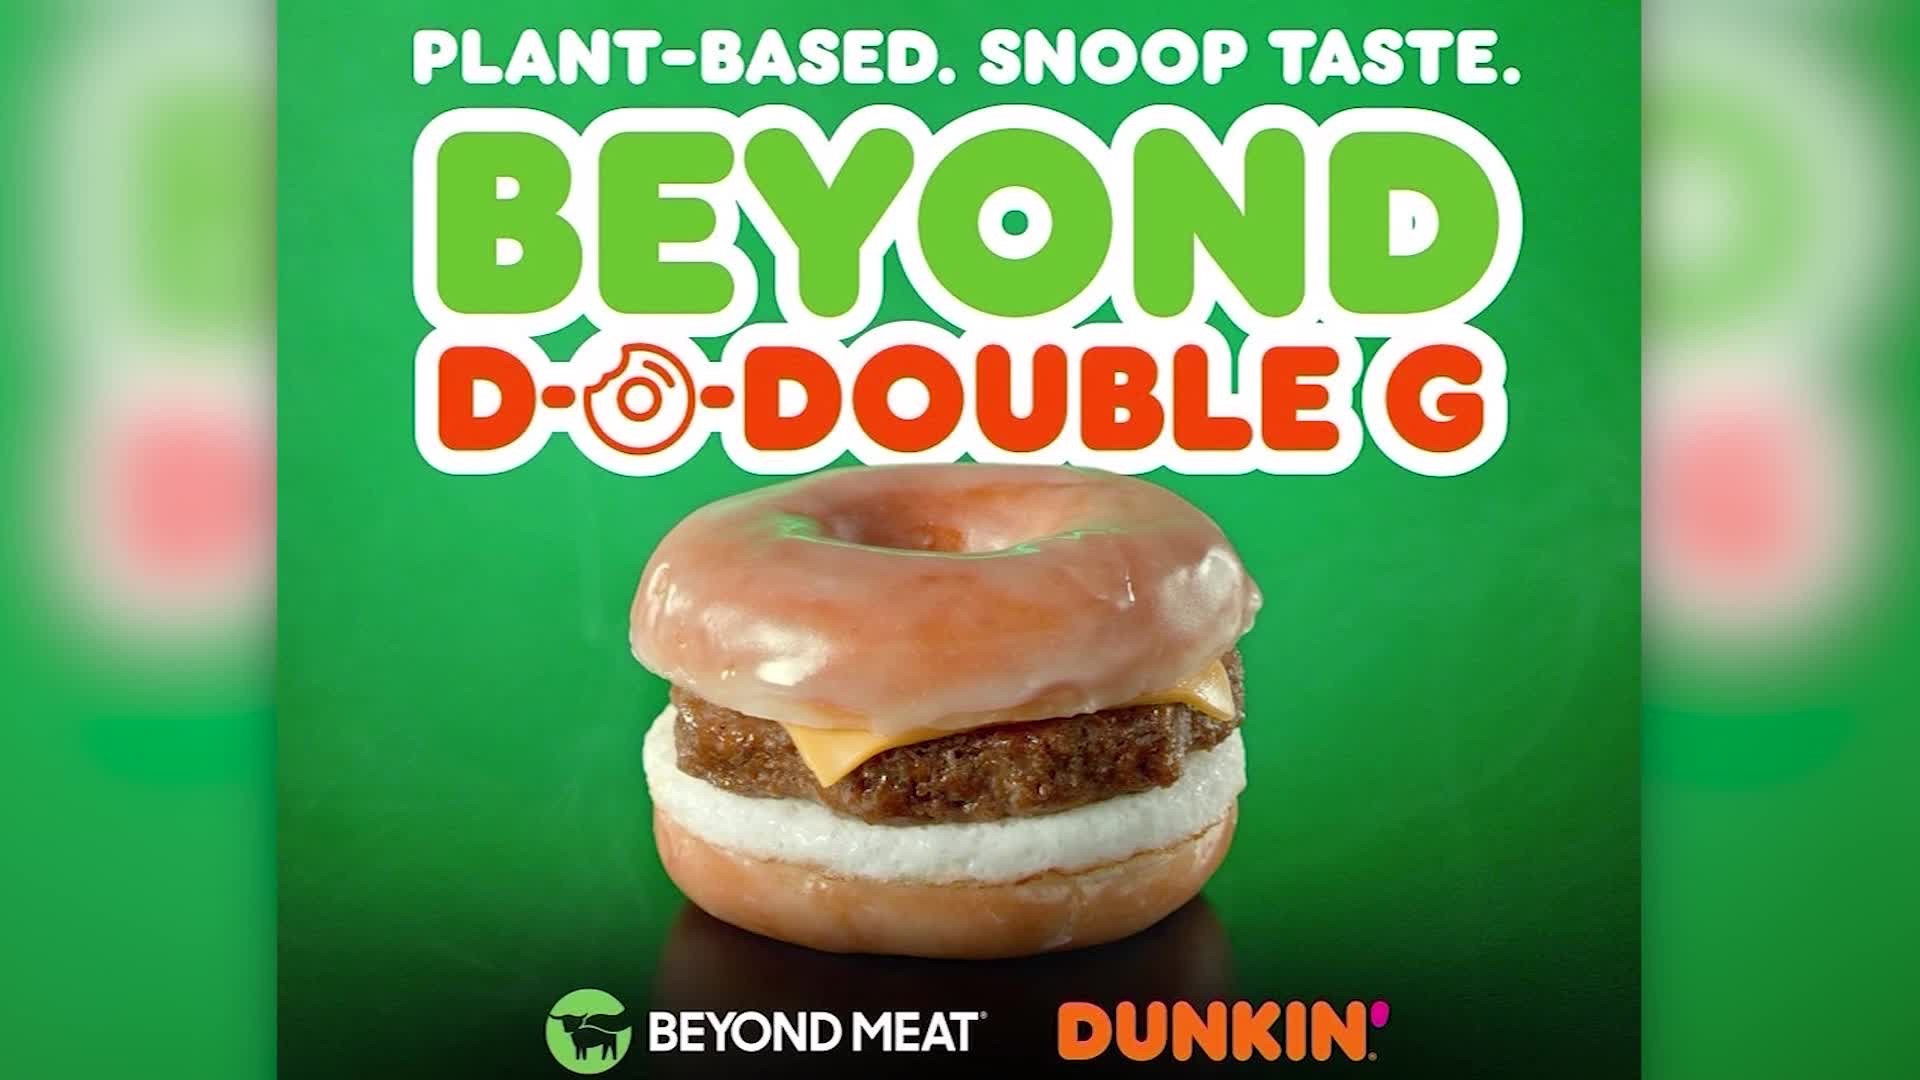 Snoop Dogg makes sandwich for Dunkin'